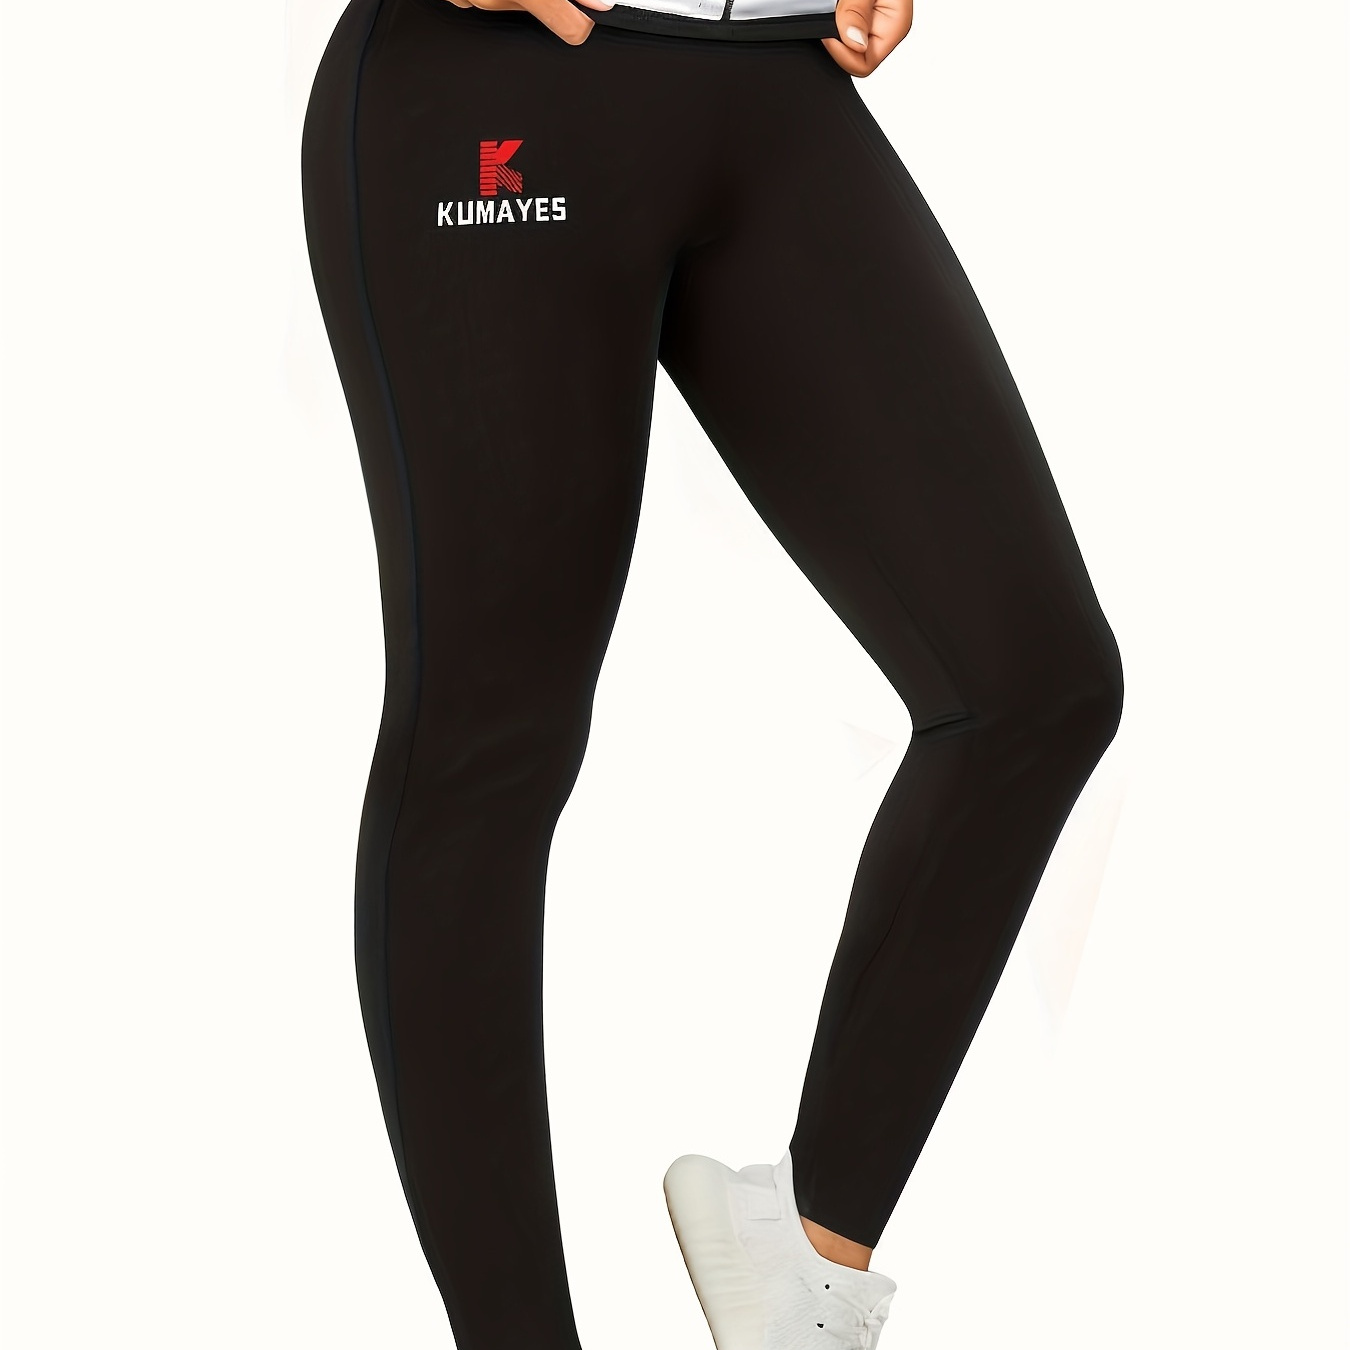 Slim & Tone Your Legs with Sauna Leggings - Women's High Waist Slimming  Workout Pants!